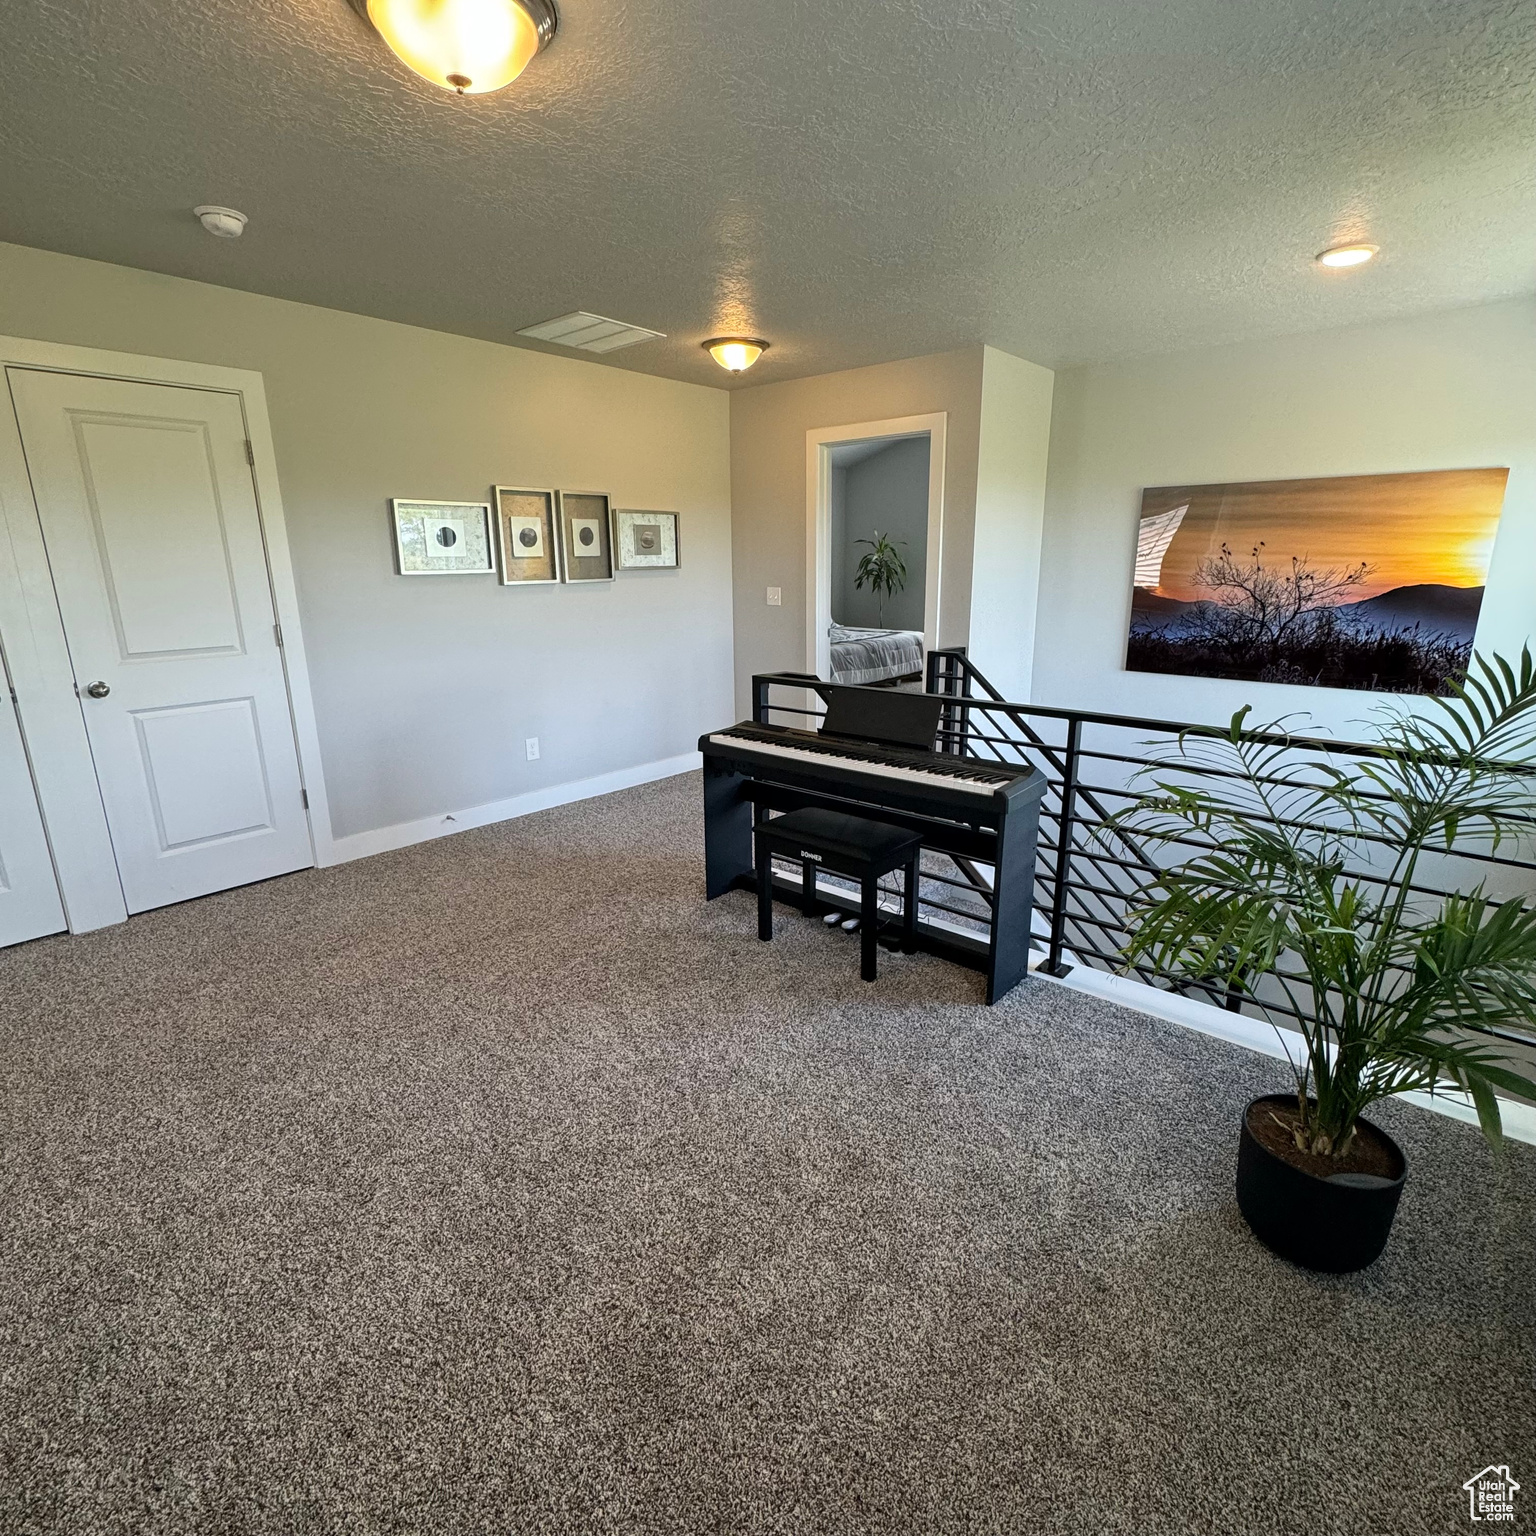 Miscellaneous room with a textured ceiling and carpet floors